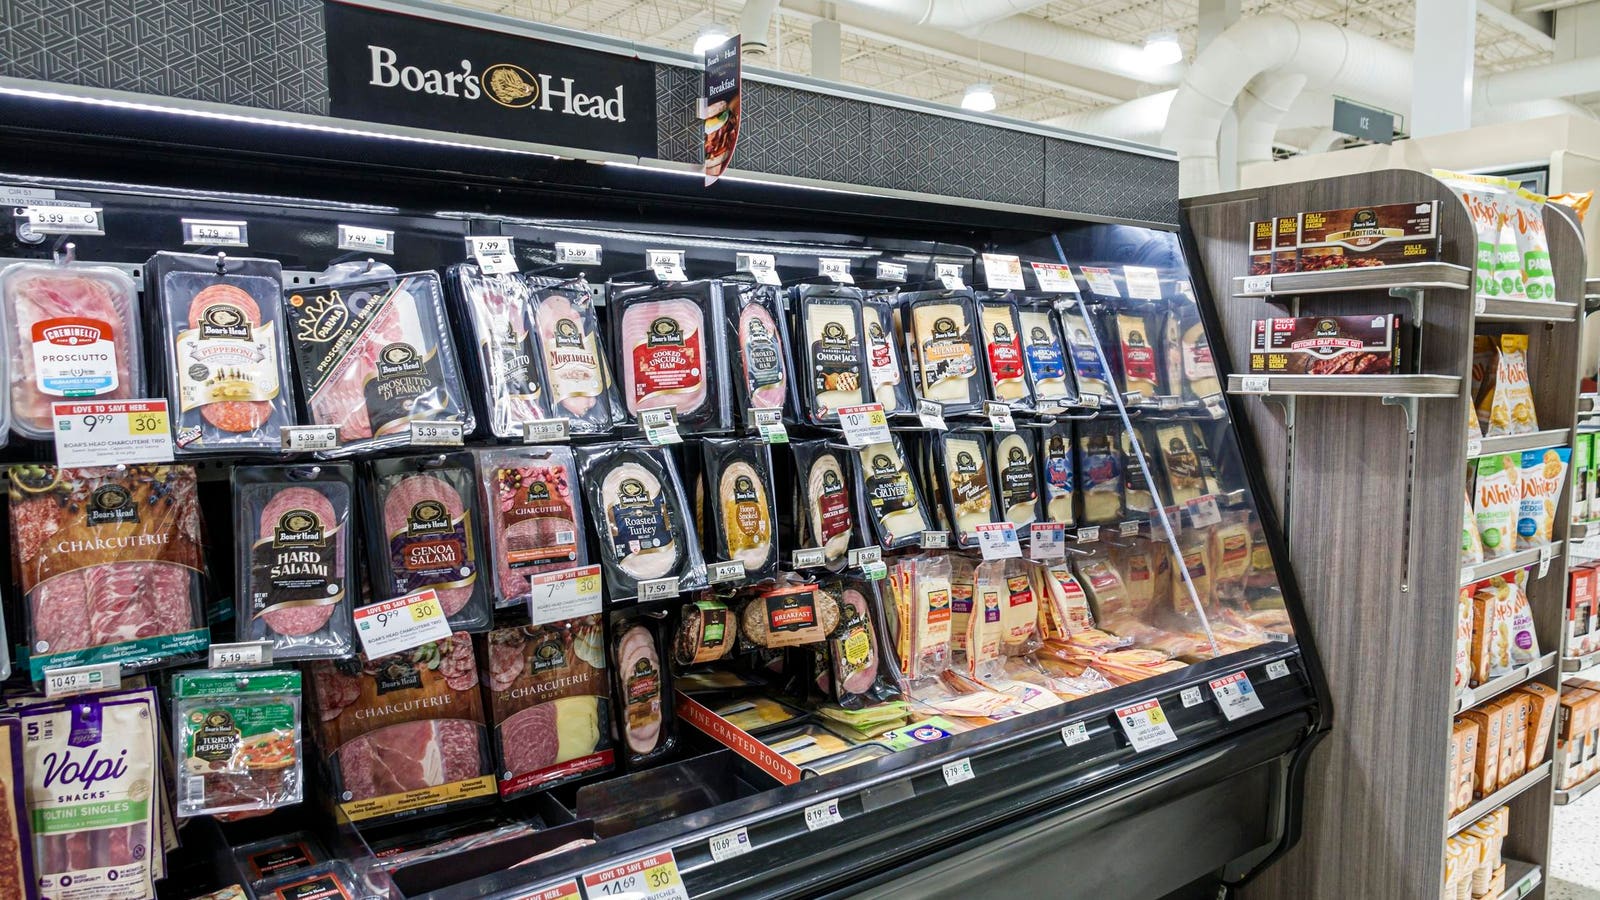 Boar’s Head Recalls 200,000 Pounds Of Deli Meats As Listeria Outbreak Expands To 13 States